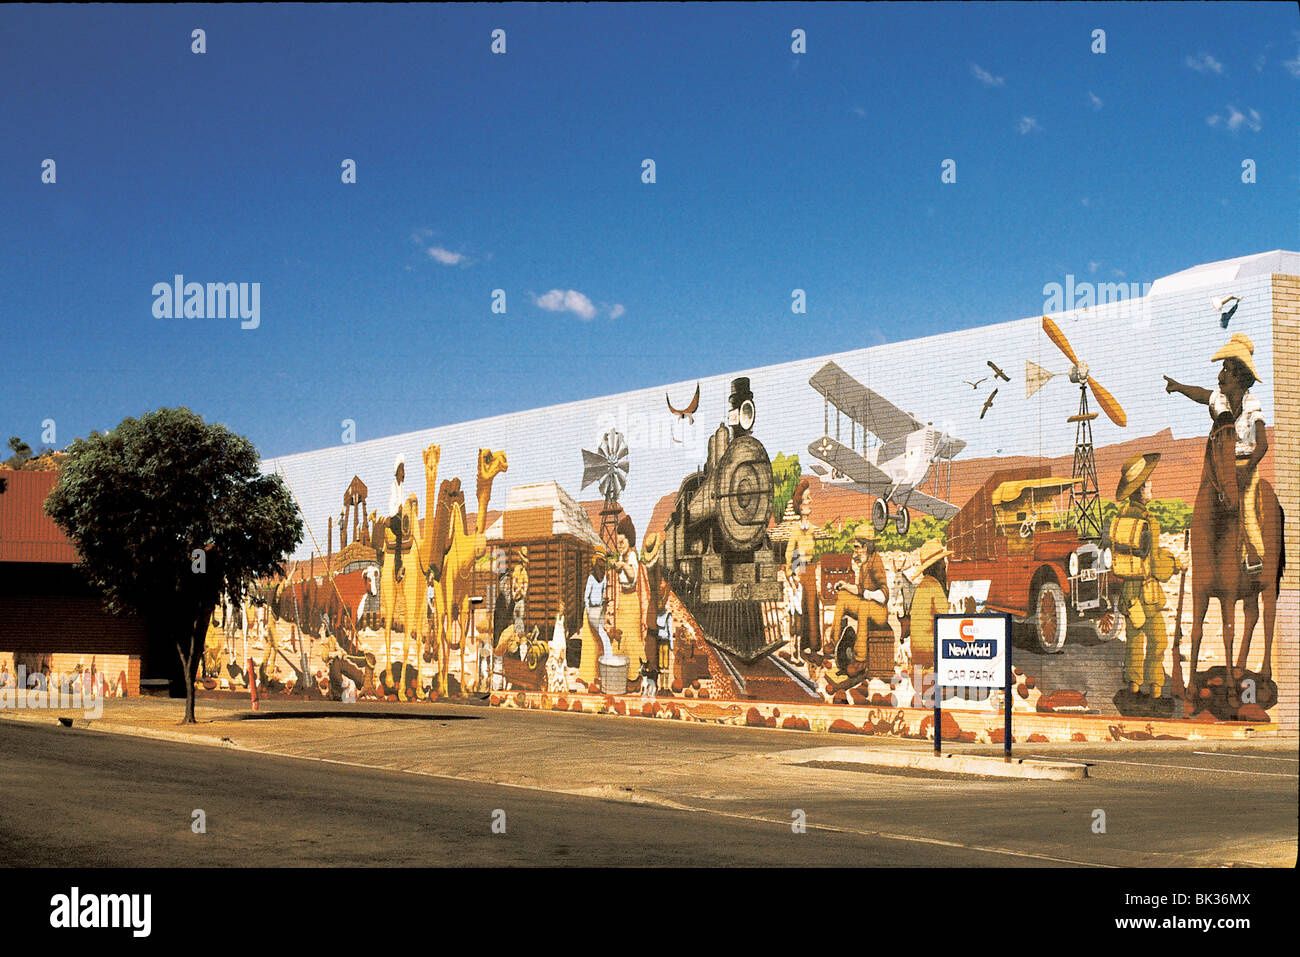 A mural depicting the European settlement and early forms of transportation in Alice Springs, Australia Stock Photo